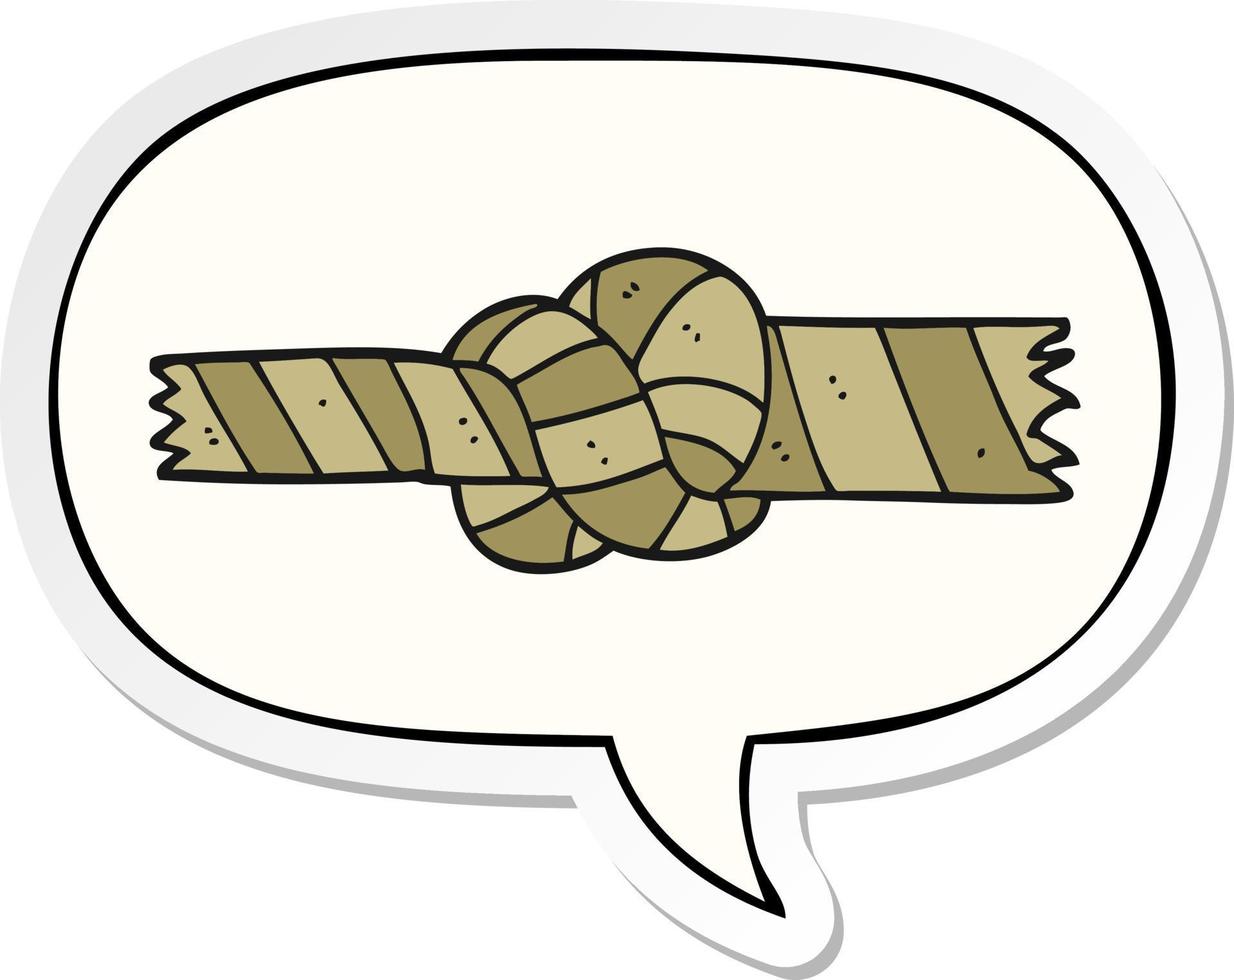 cartoon knotted rope and speech bubble sticker vector